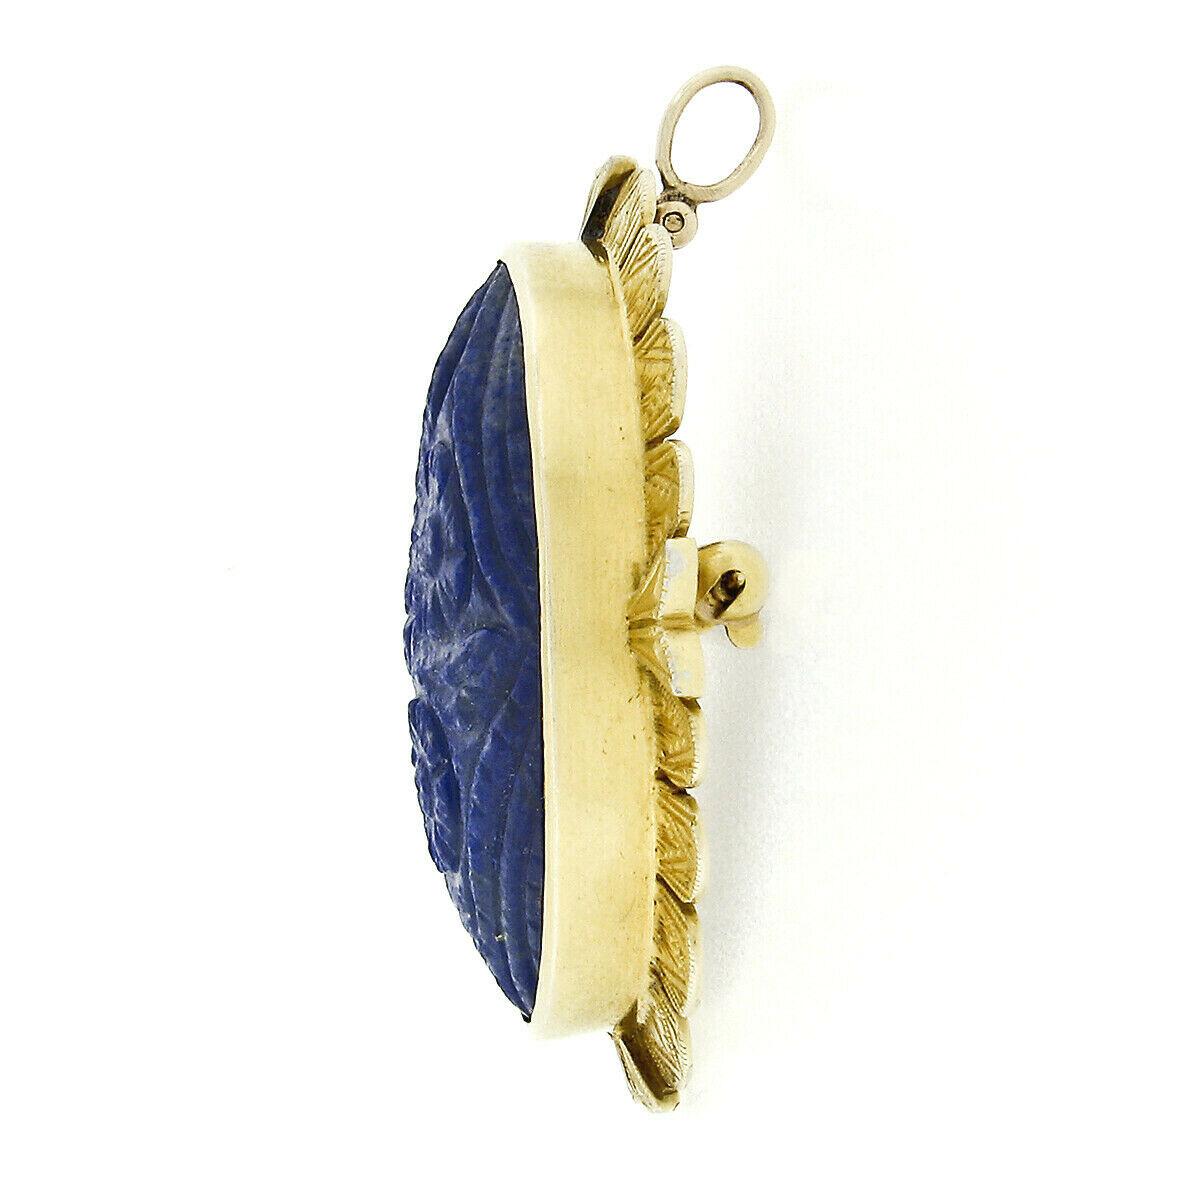 Victorian Antique Etruscan Revival 14k Gold GIA Carved Oval Blue Lapis Pendant or Brooch For Sale